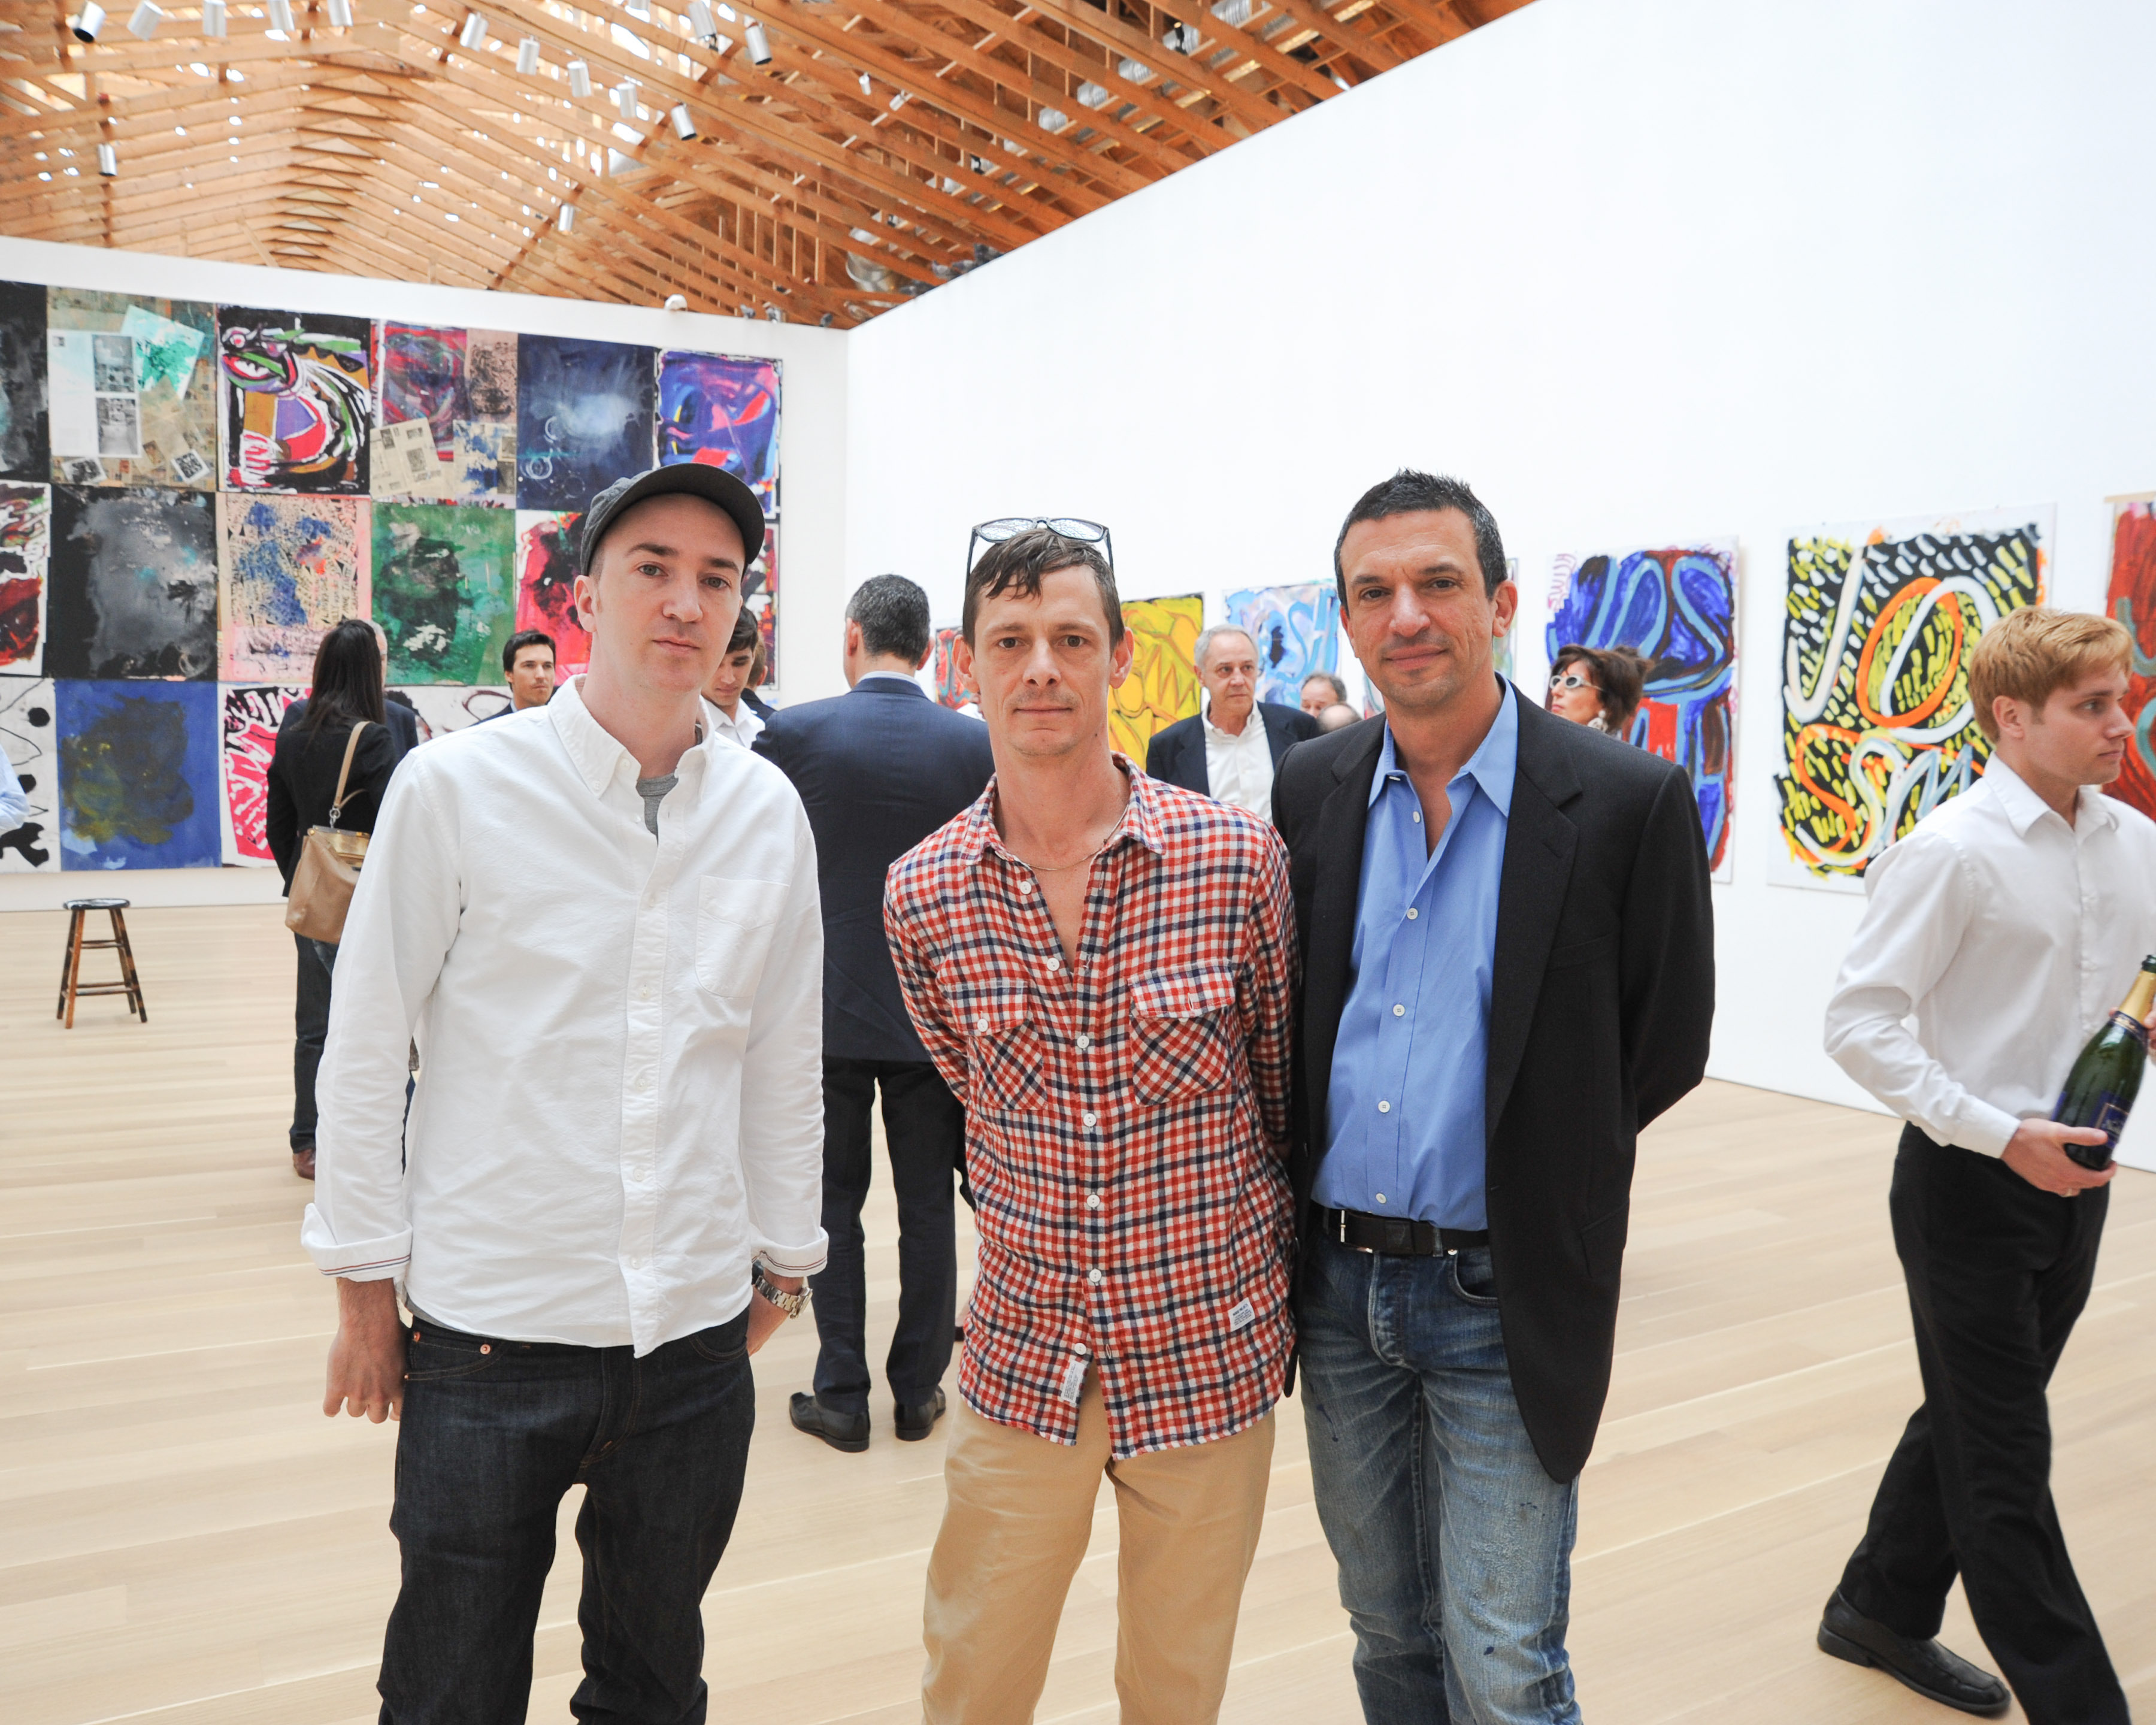 Josh Smith The American Dream Opening - The Brant Foundation